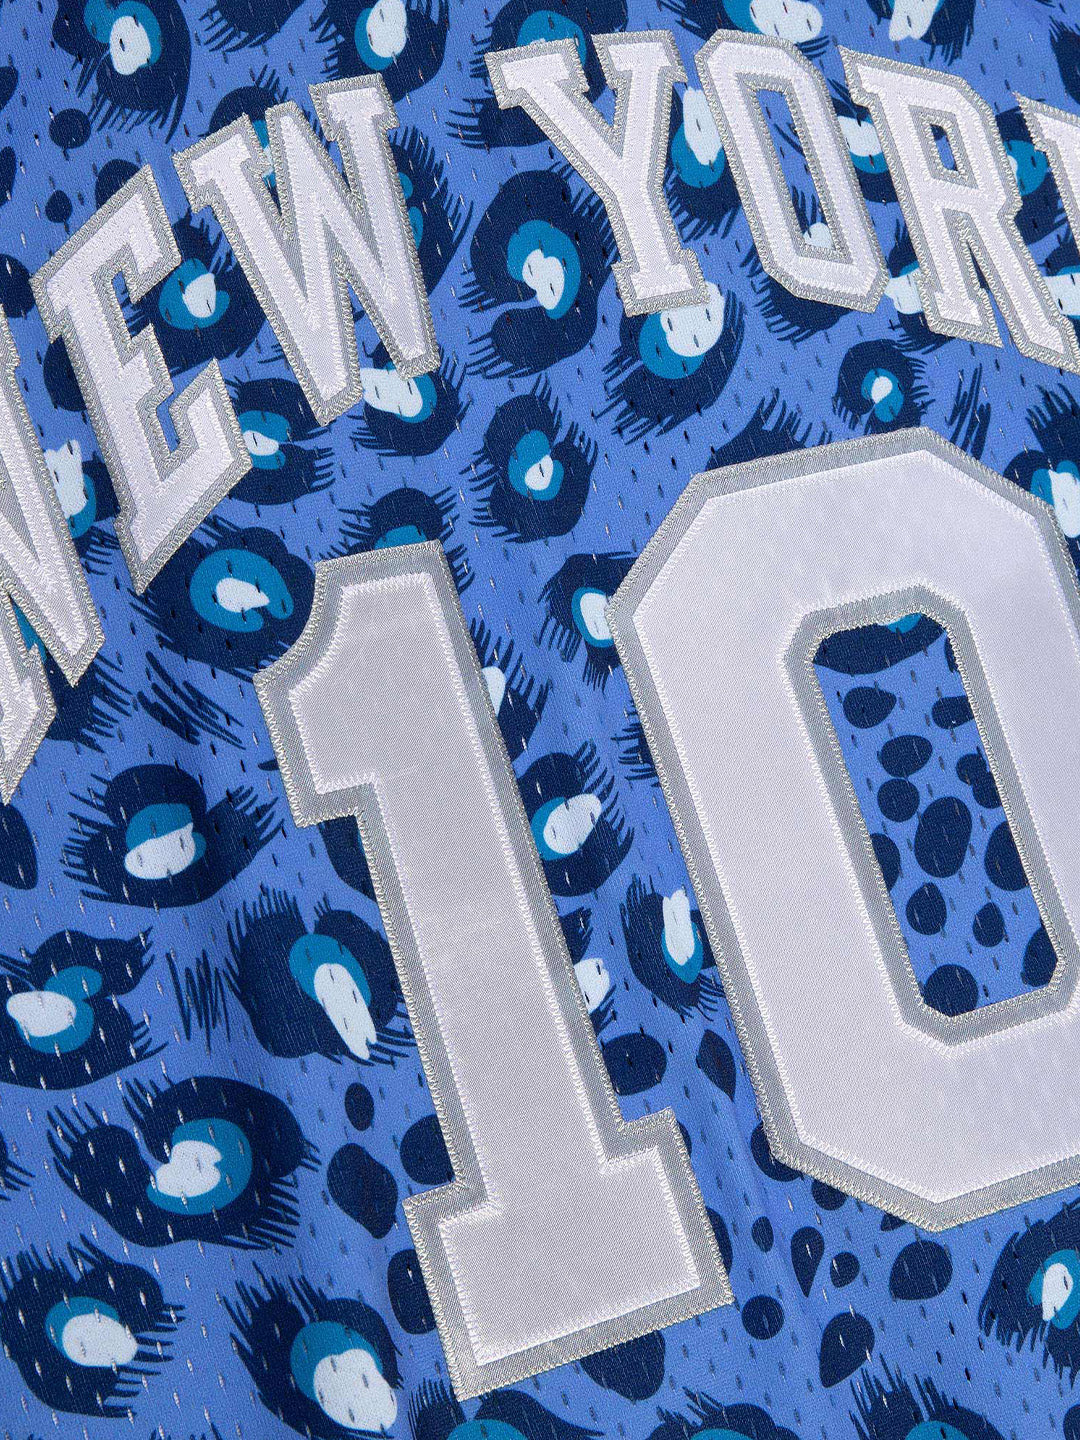 close up of the new york and number 10